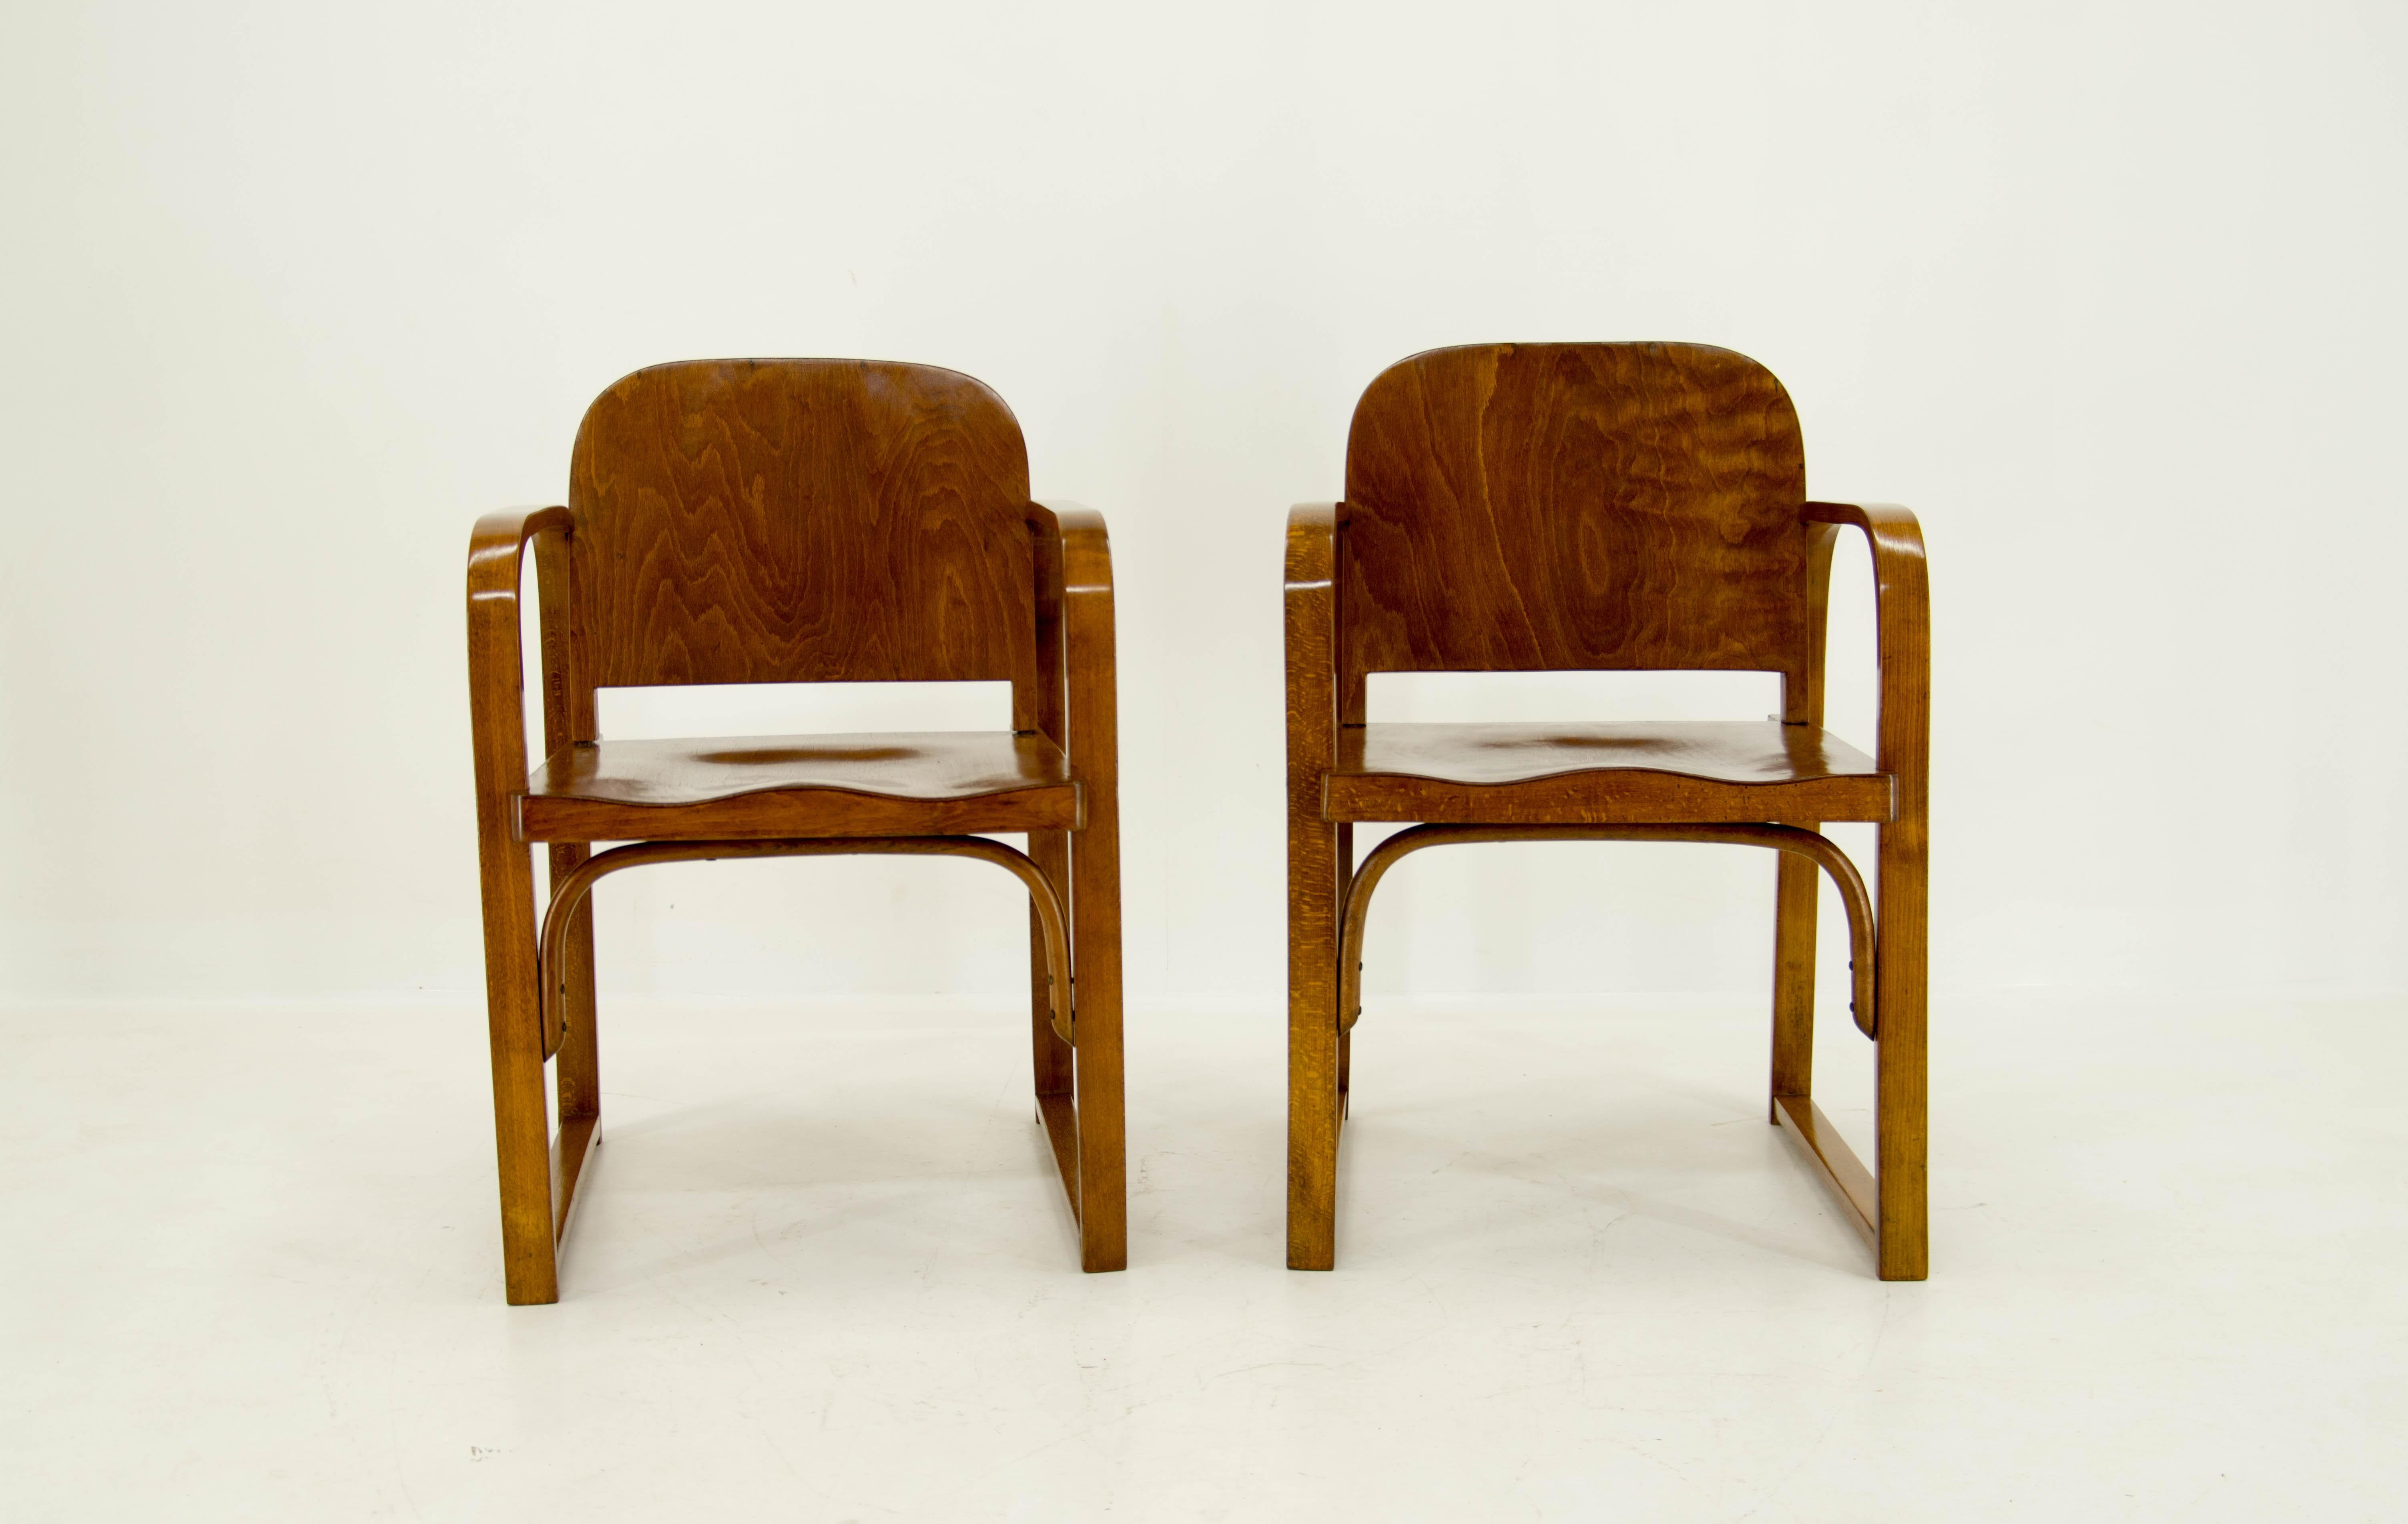 Wooden chairs made by Tatra in 1930s. The chairs are built of sharp, geometric lines with rounded corners. The armrests are made of bent technology, the chair seat is gently ergonomically shaped. The chairs are made of bent, steamed beech wood with